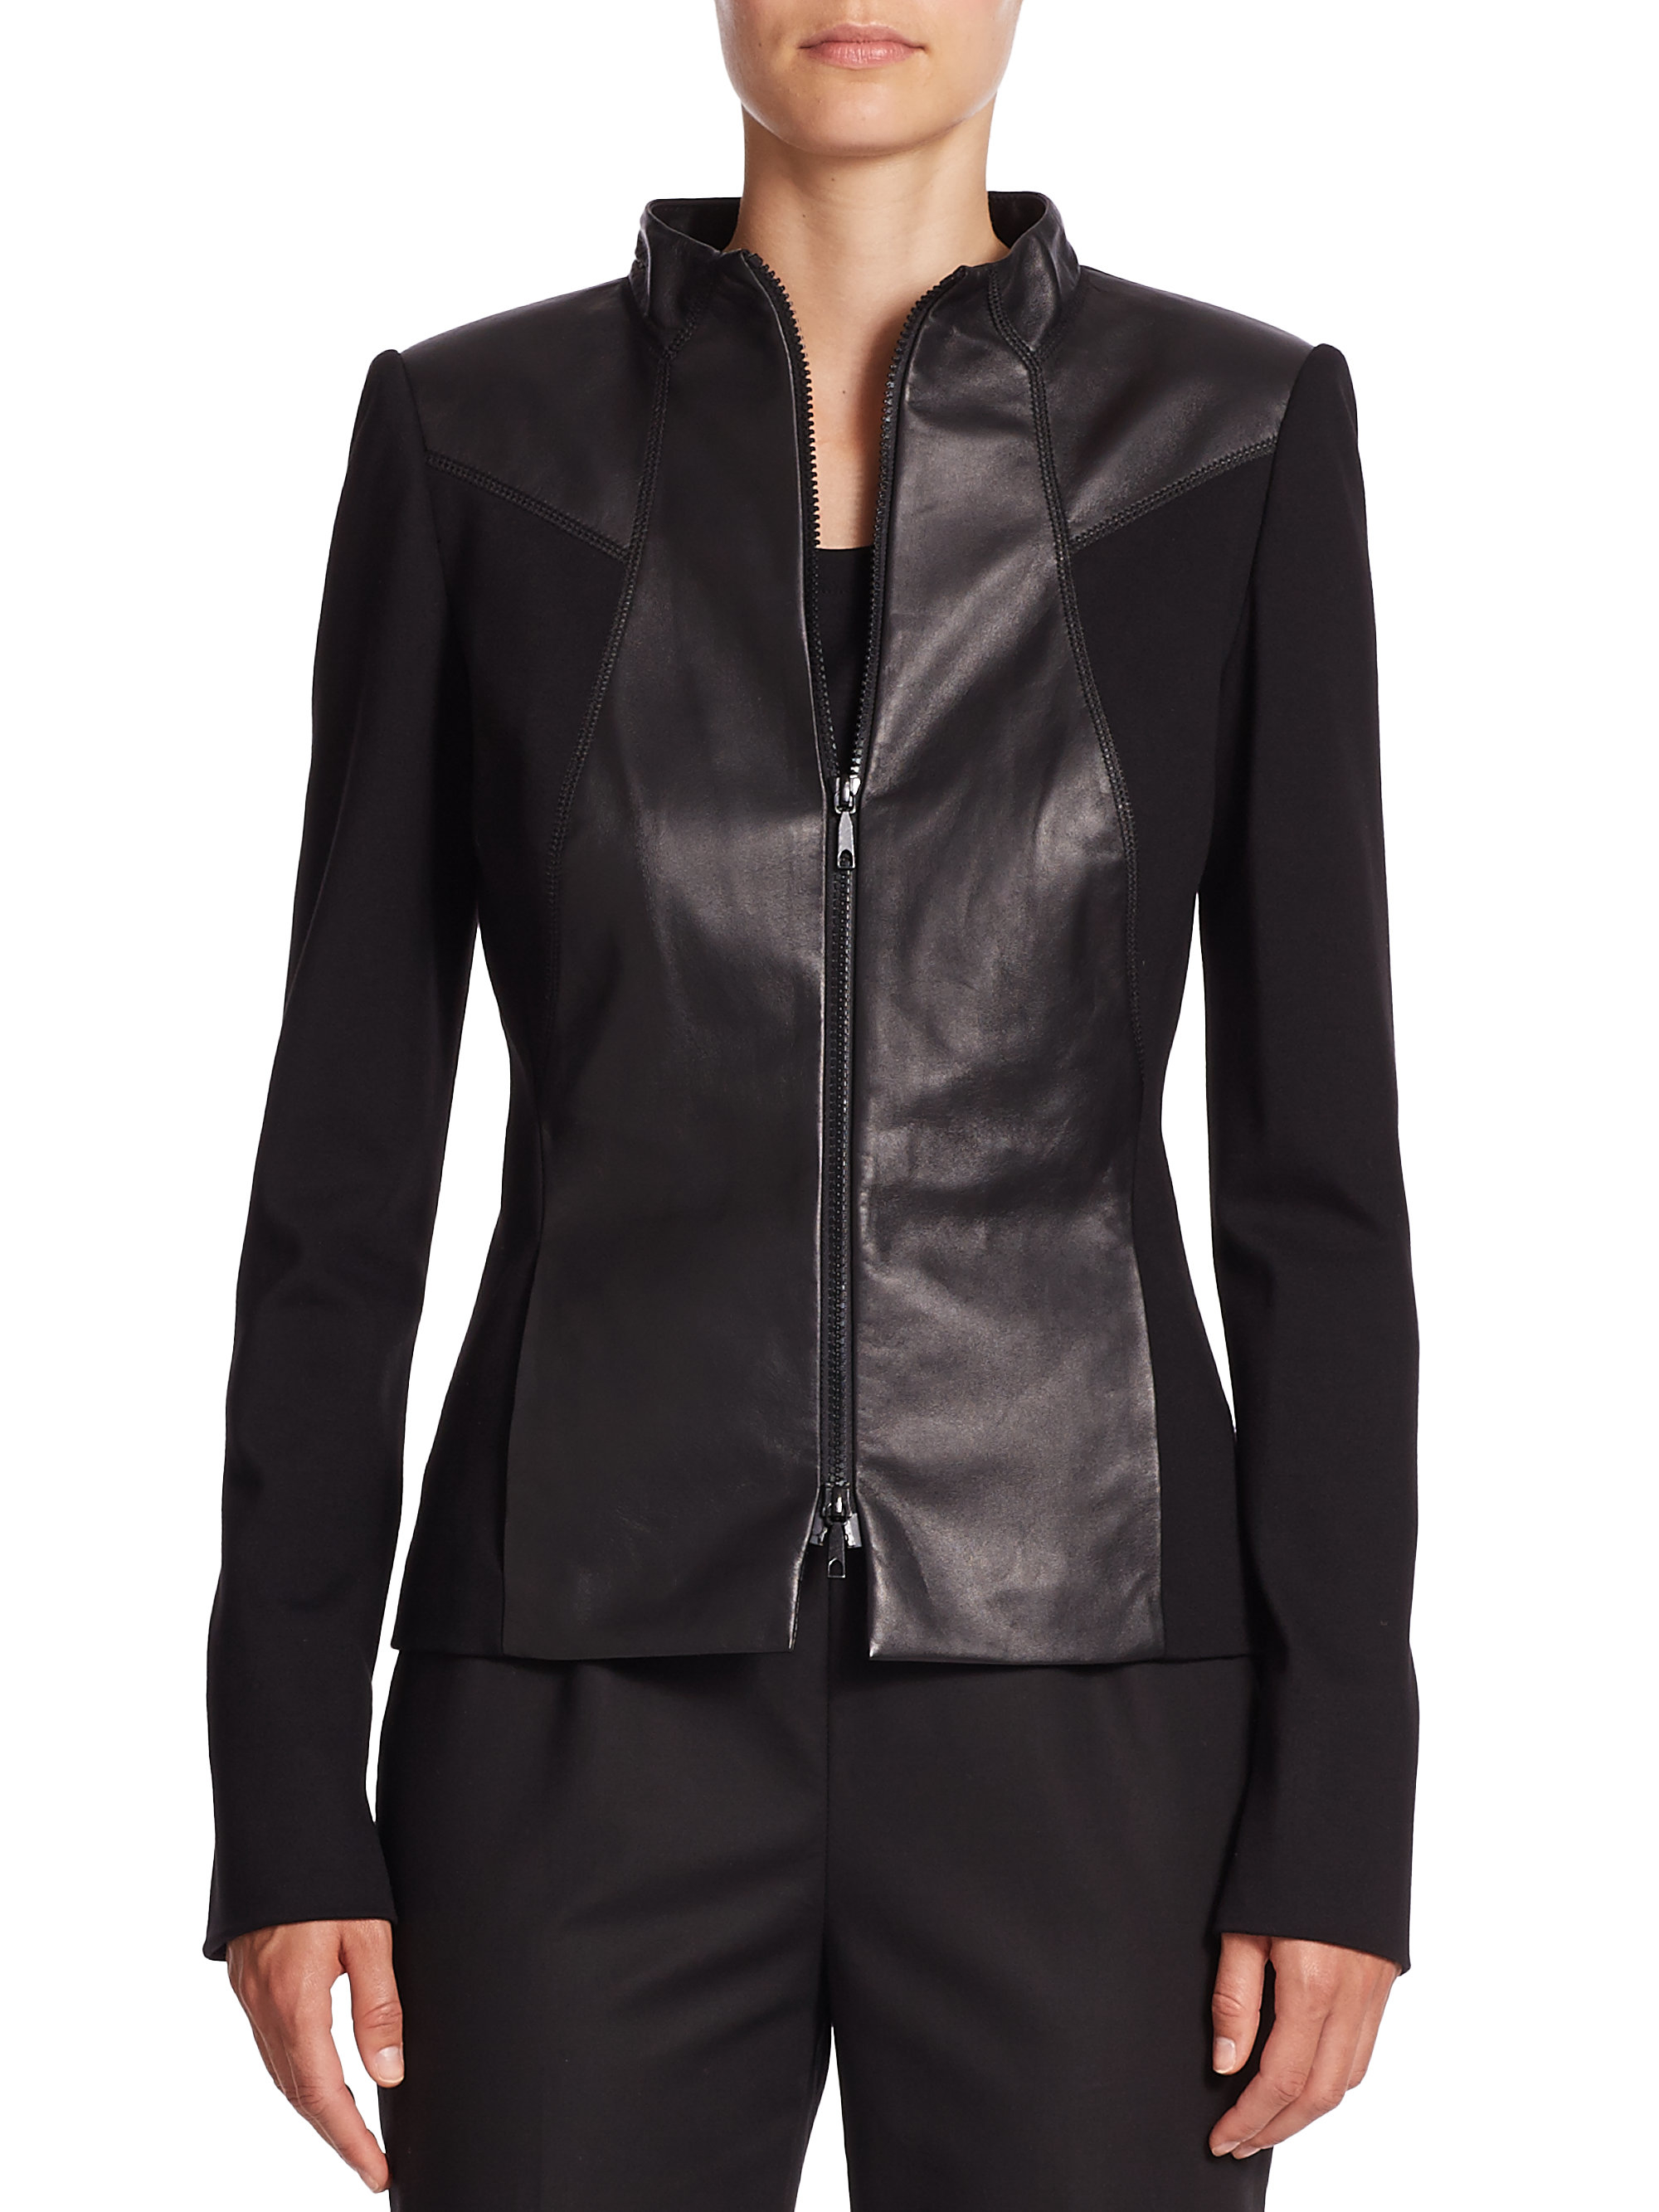 Lafayette 148 new york Laura Leather & Ponte Knit Jacket in Black | Lyst